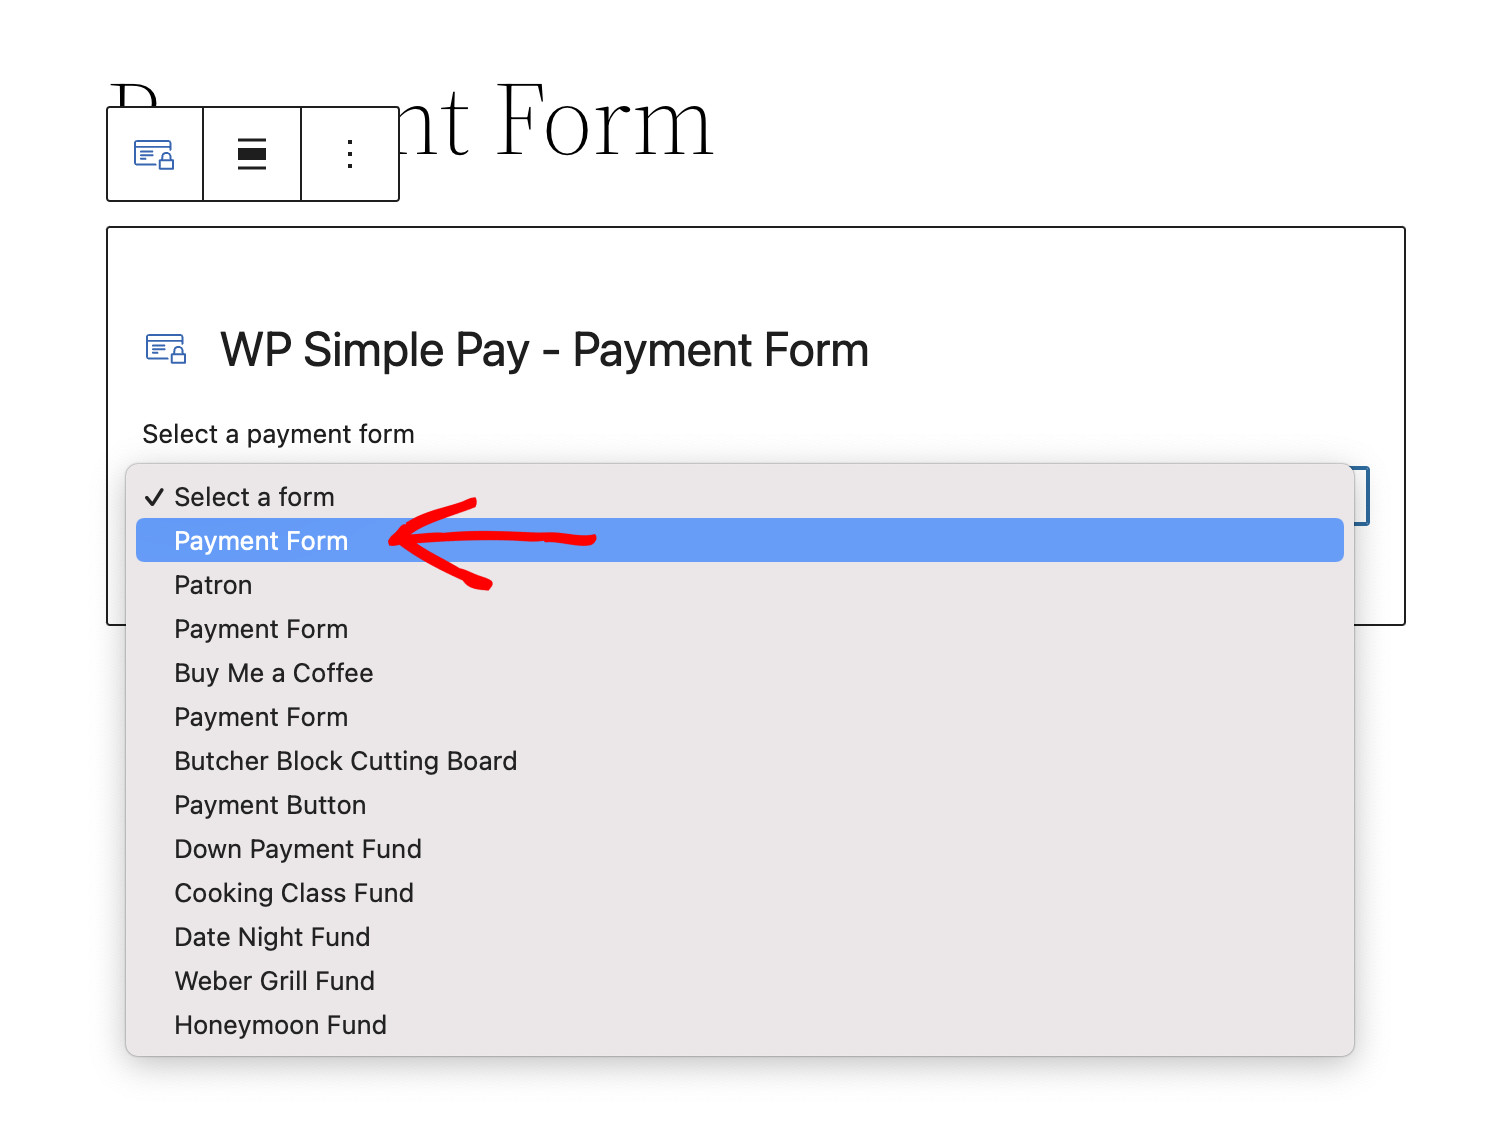 Select payment form